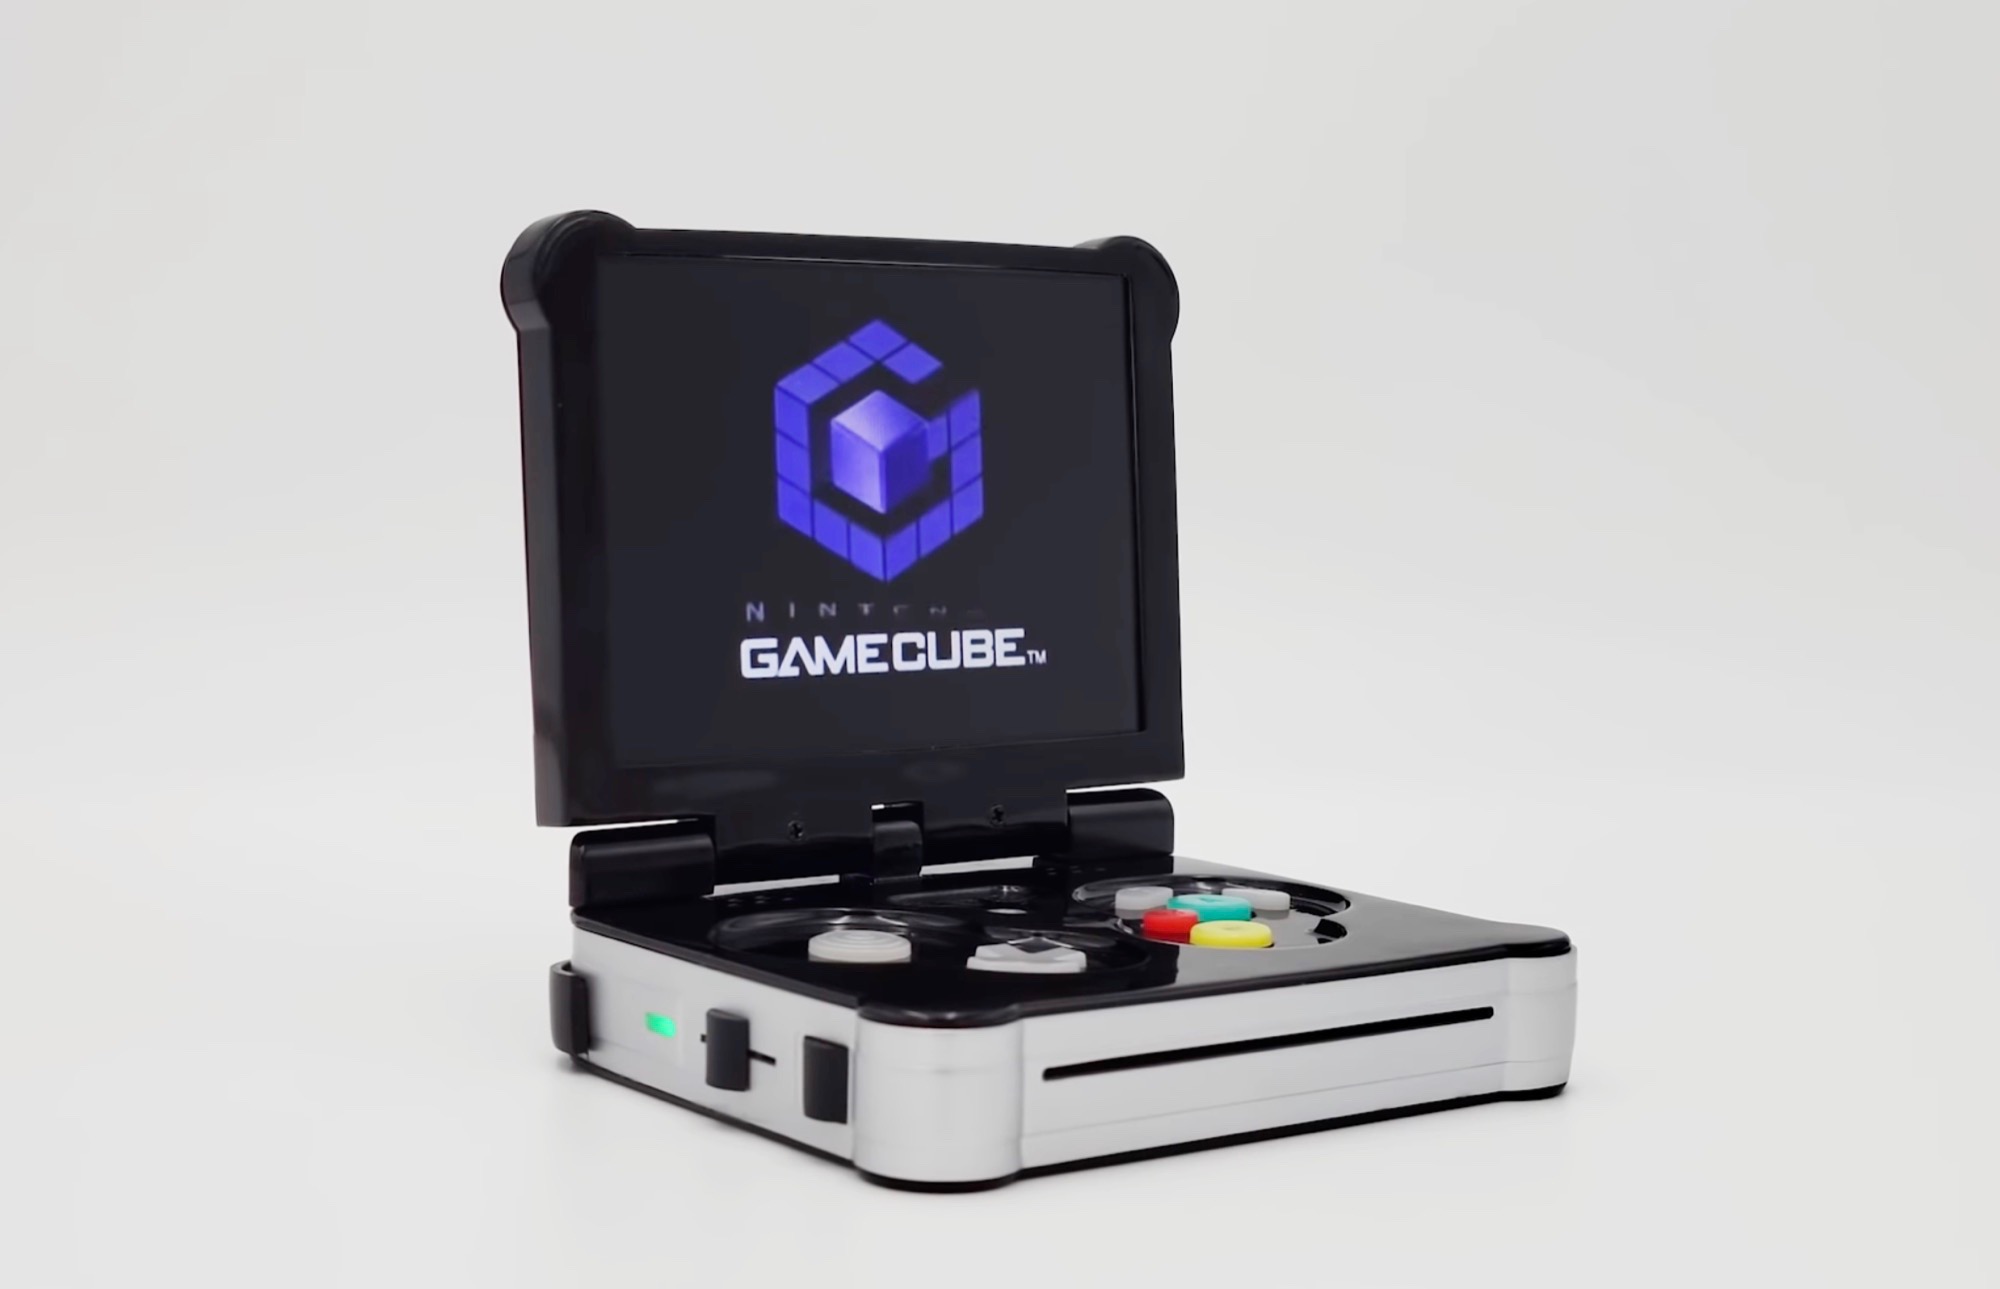 Infamous Nintendo GameCube handheld is finally a reality with some caveats  -  News